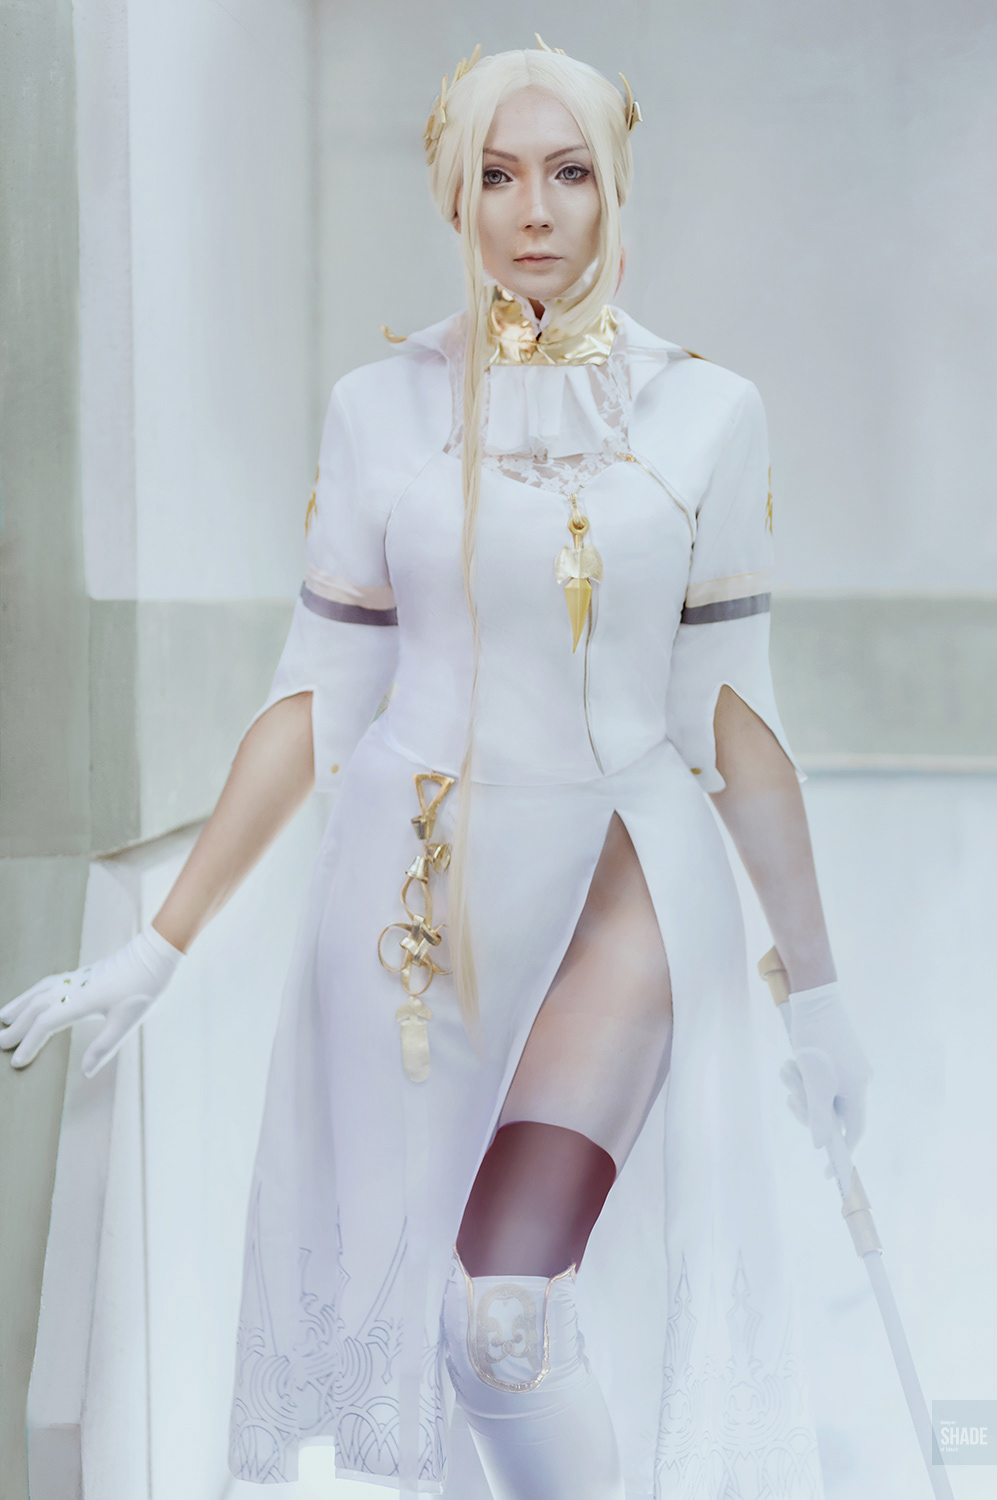 Lina Aster photography - Commander White